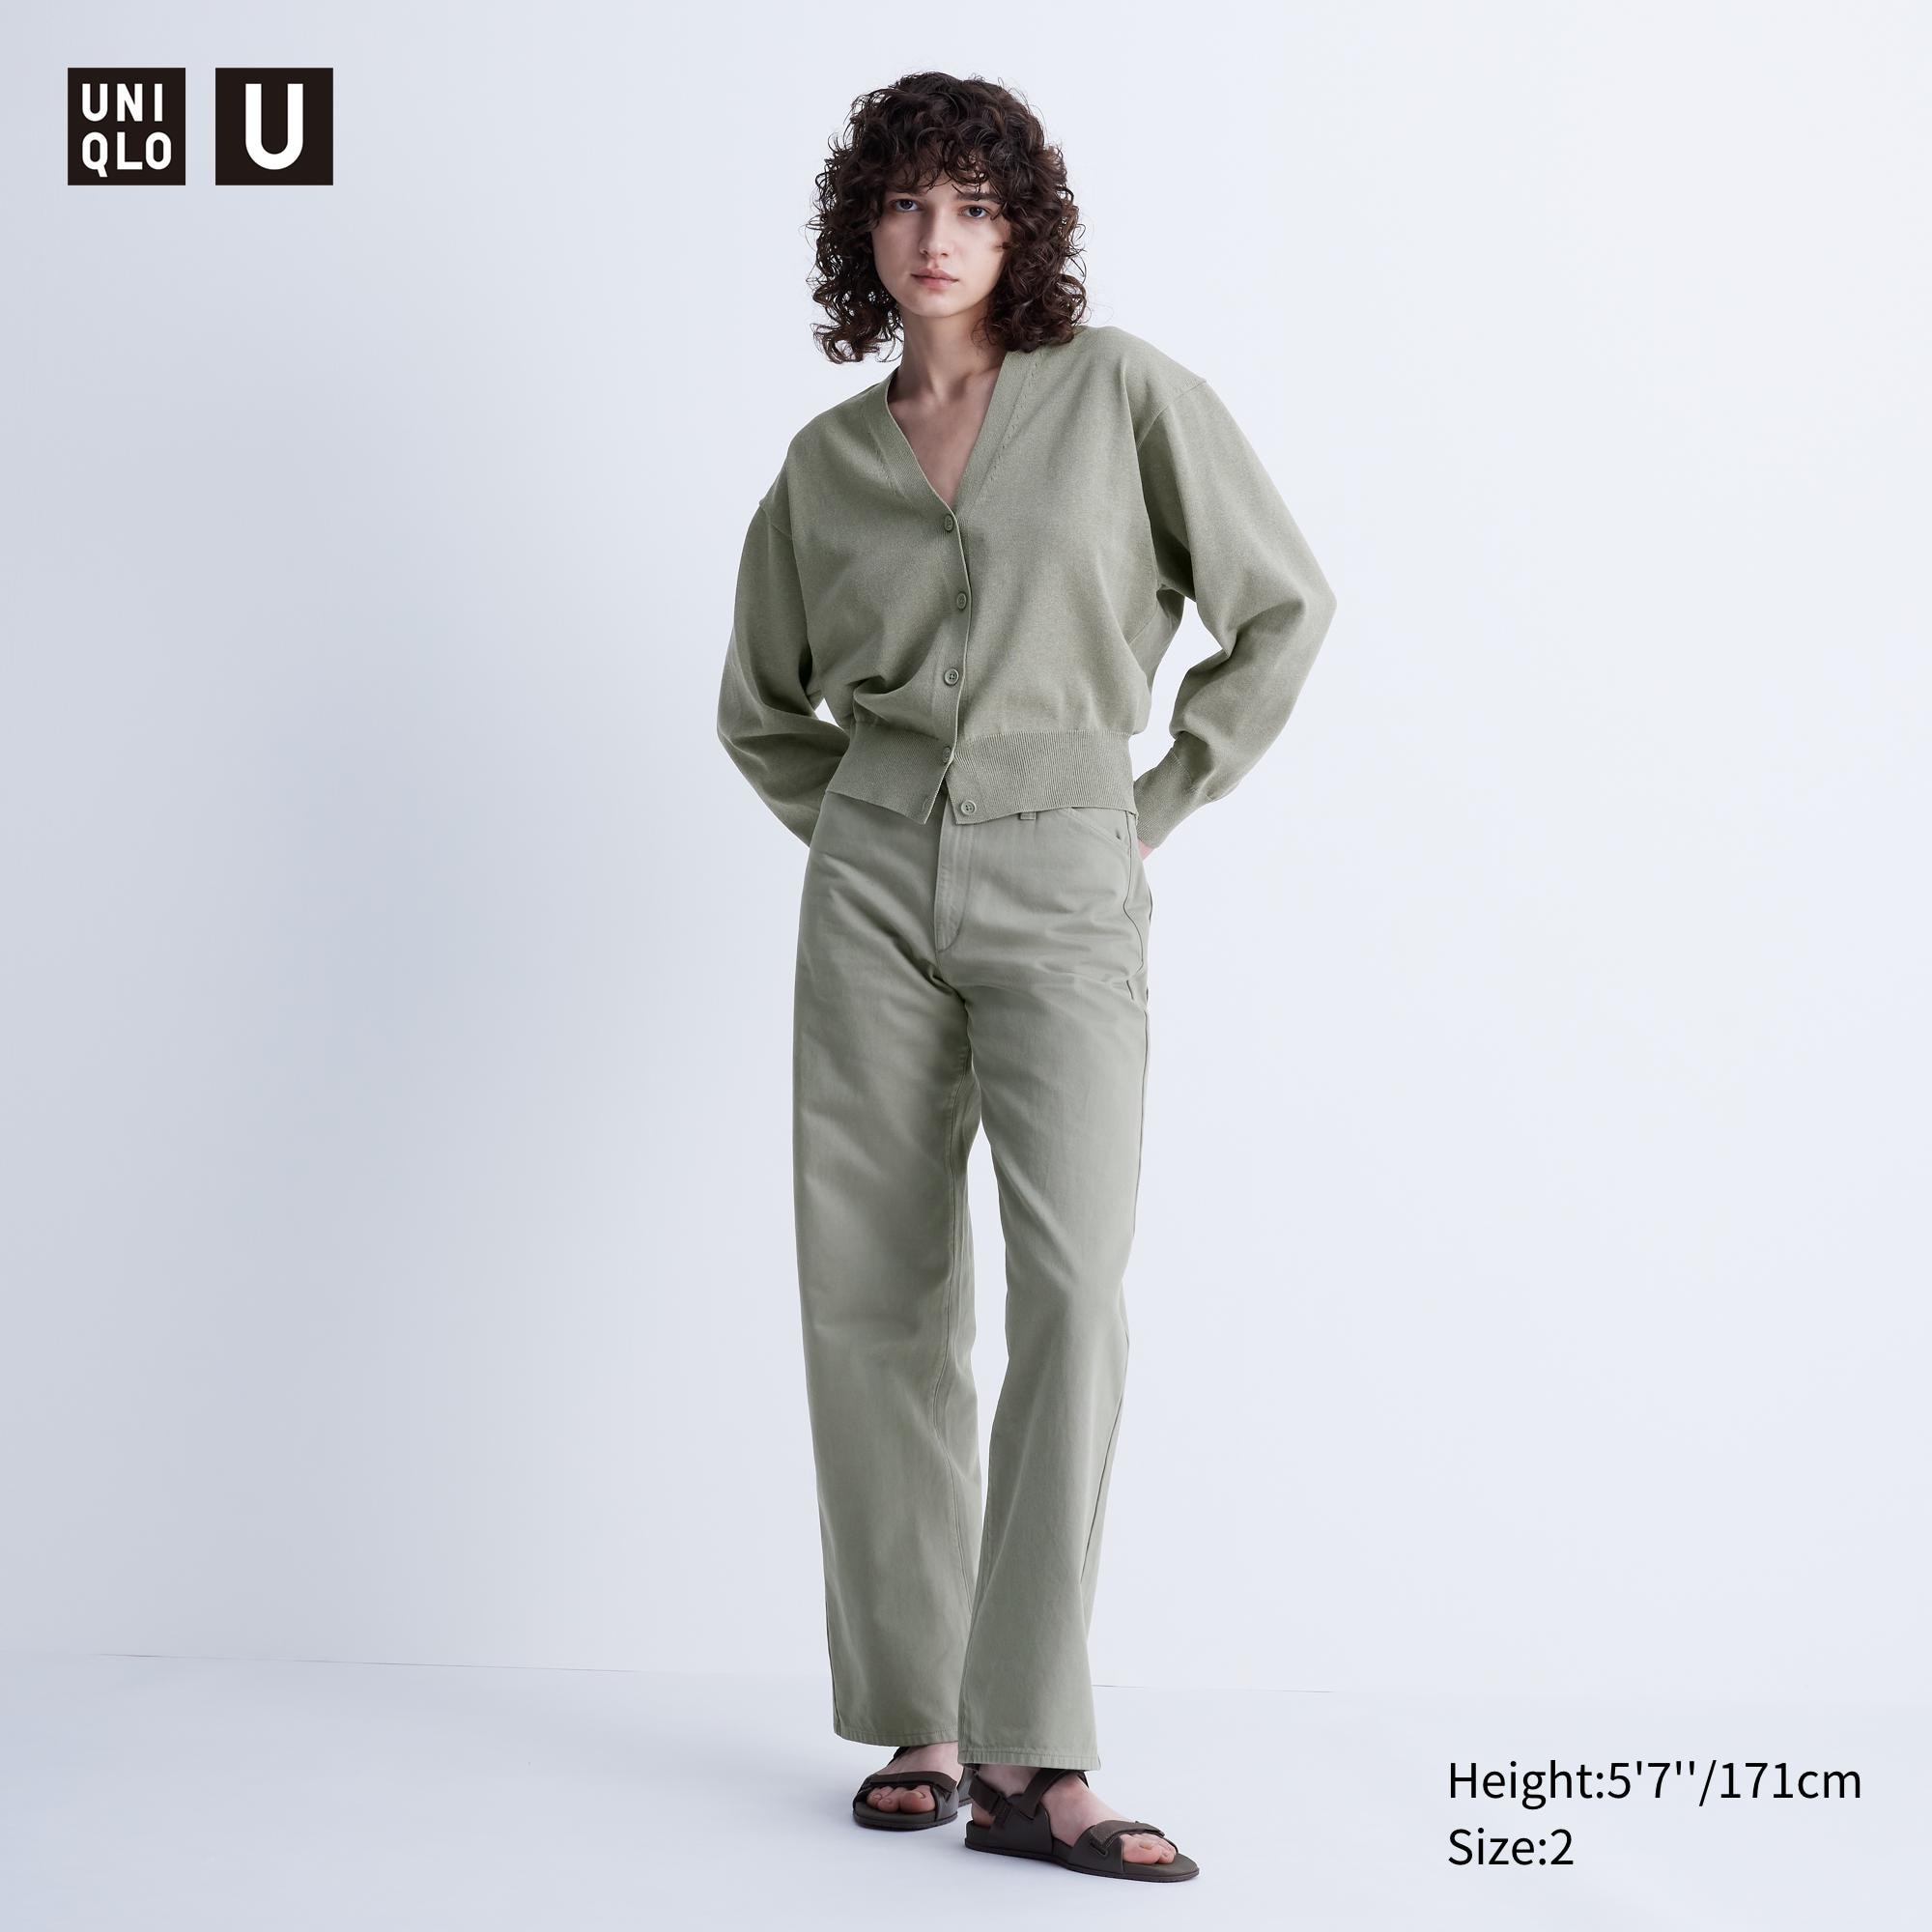 High Waisted Straight Color Jeans | UNIQLO US